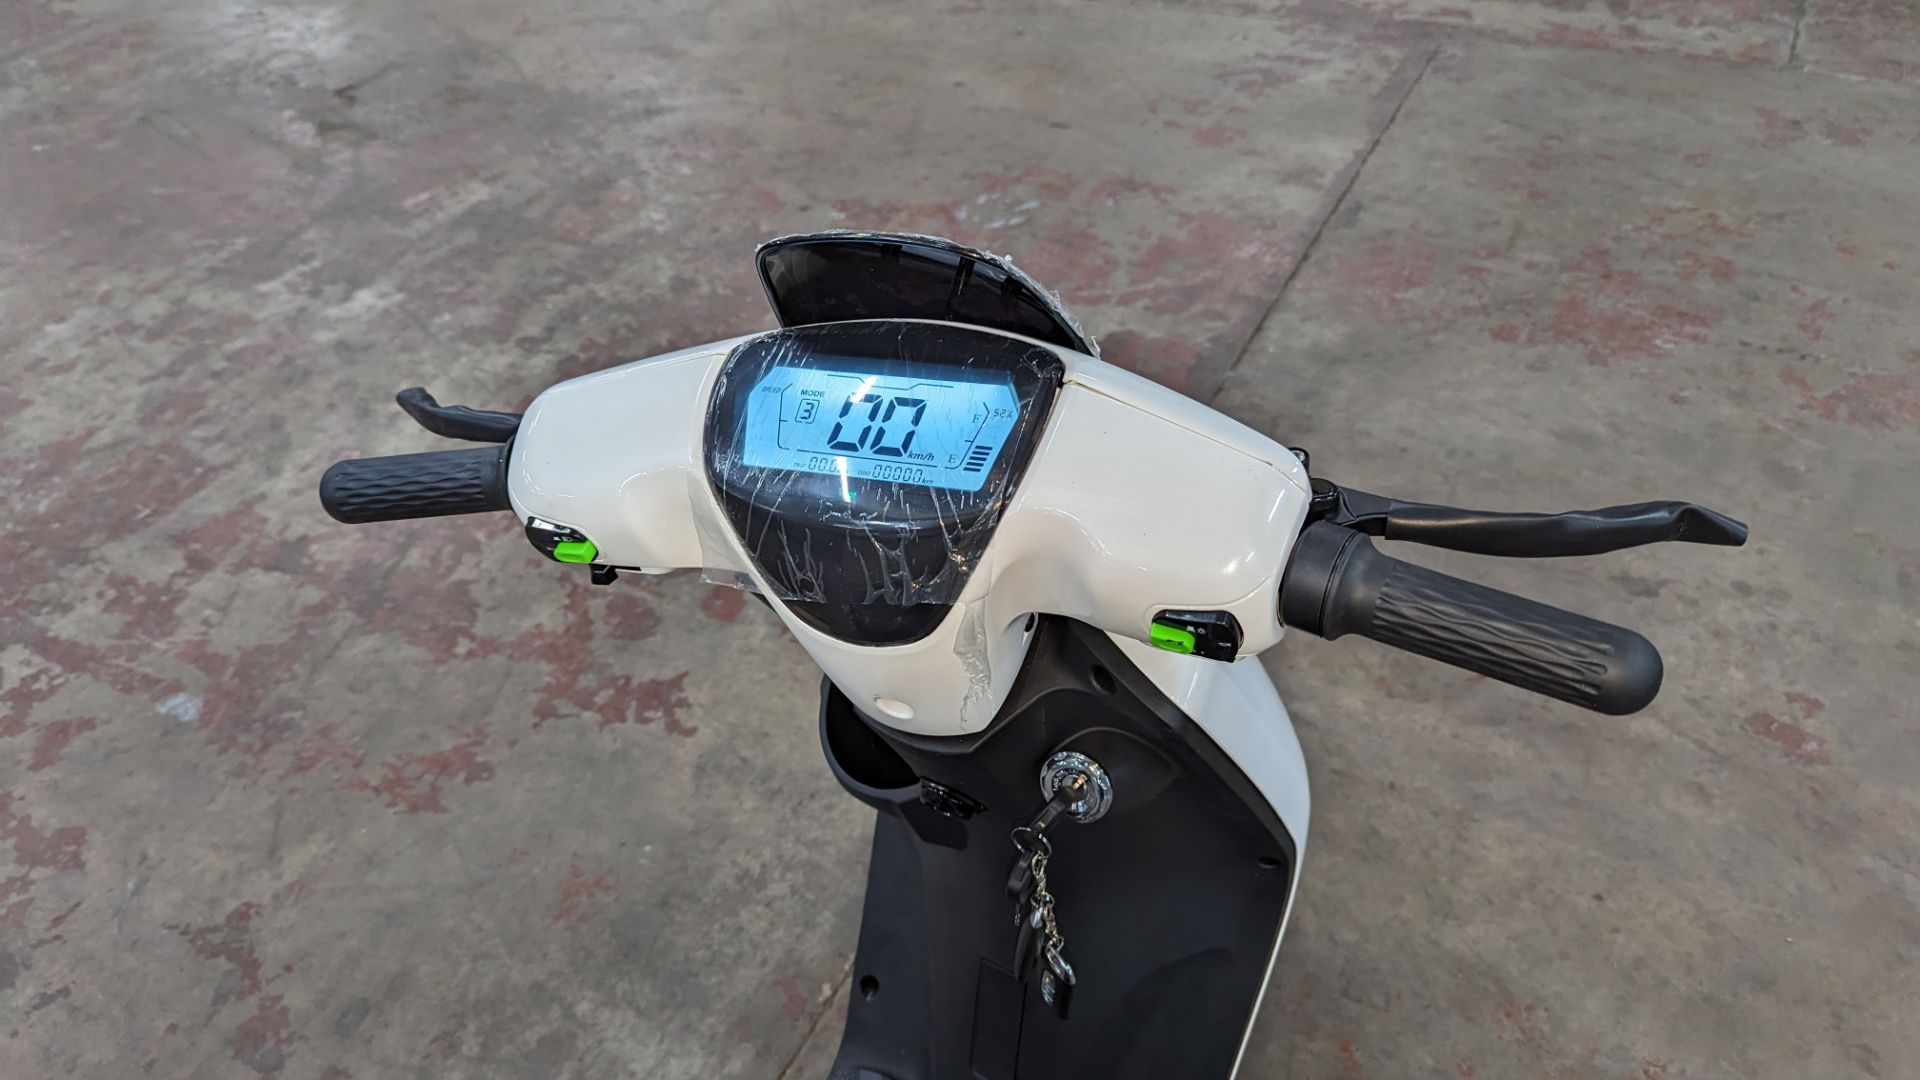 Model 18 Electric Bike: Zero (0) recorded miles, white body with black detailing, insulated box moun - Image 12 of 16